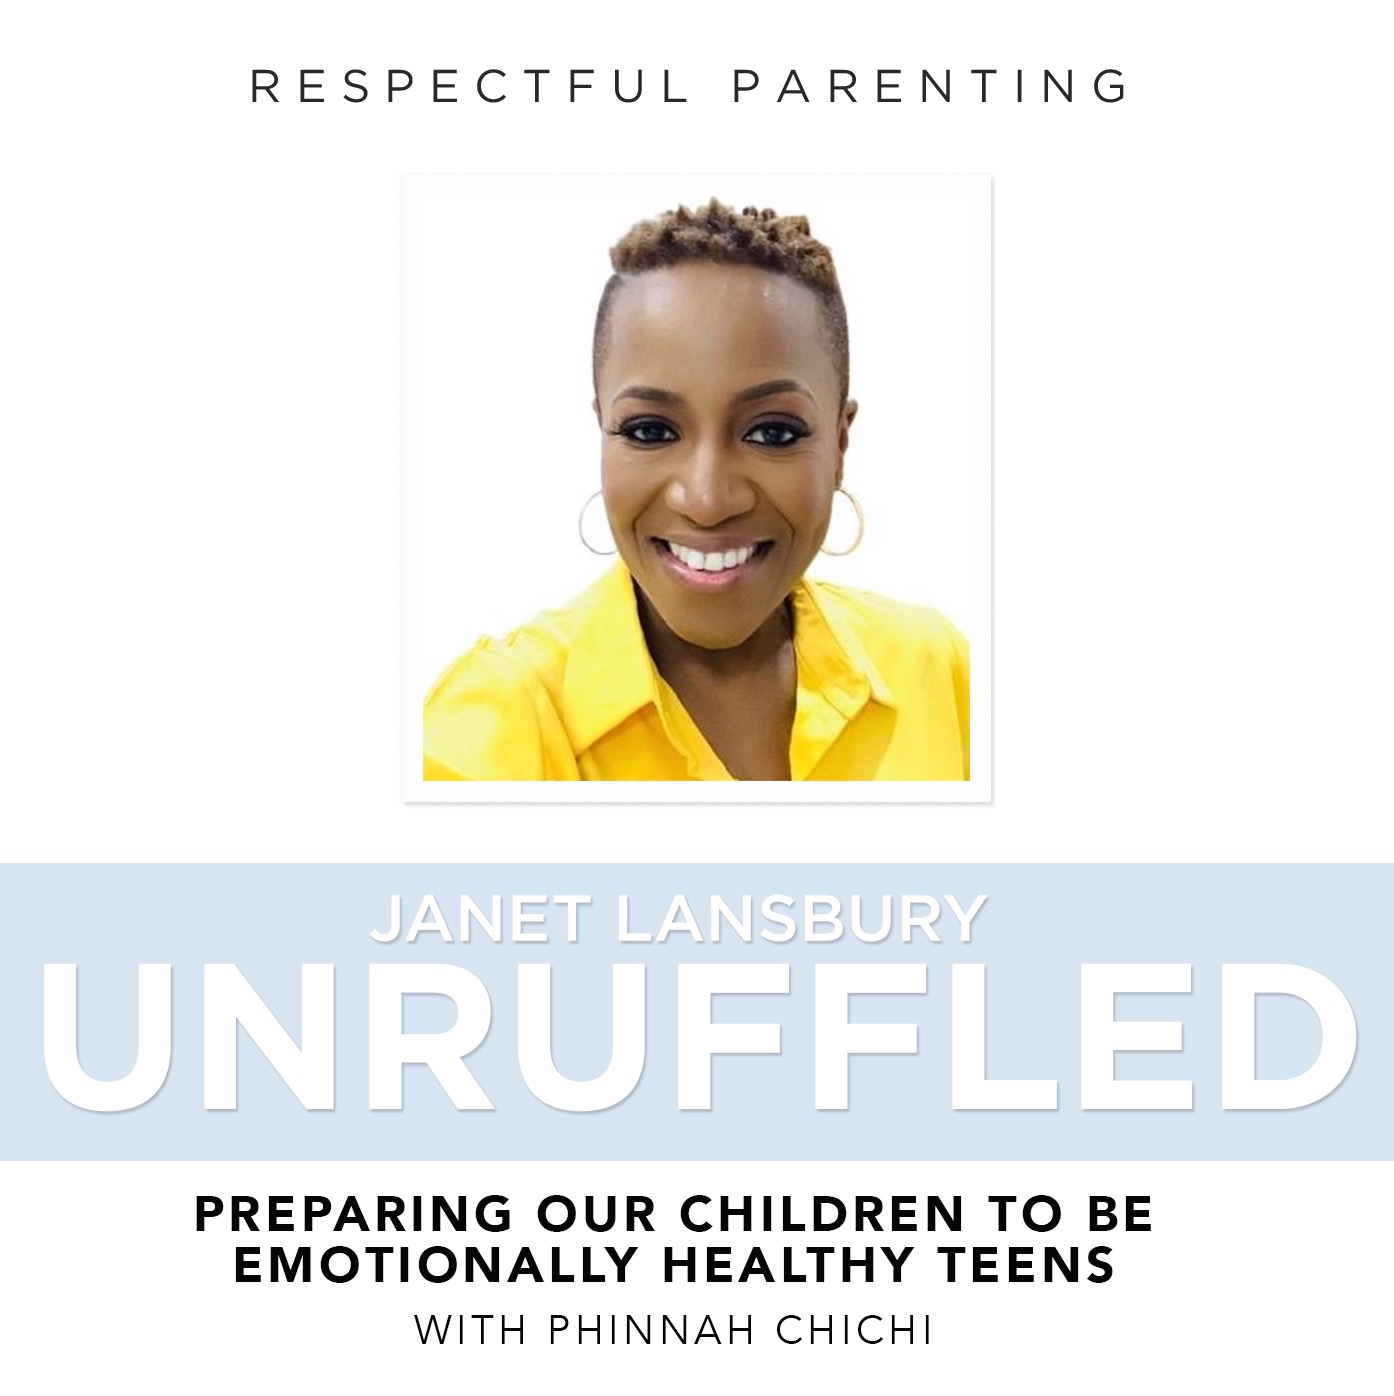 Preparing Our Children to Be Emotionally Healthy Teens (With Phinnah Chichi)